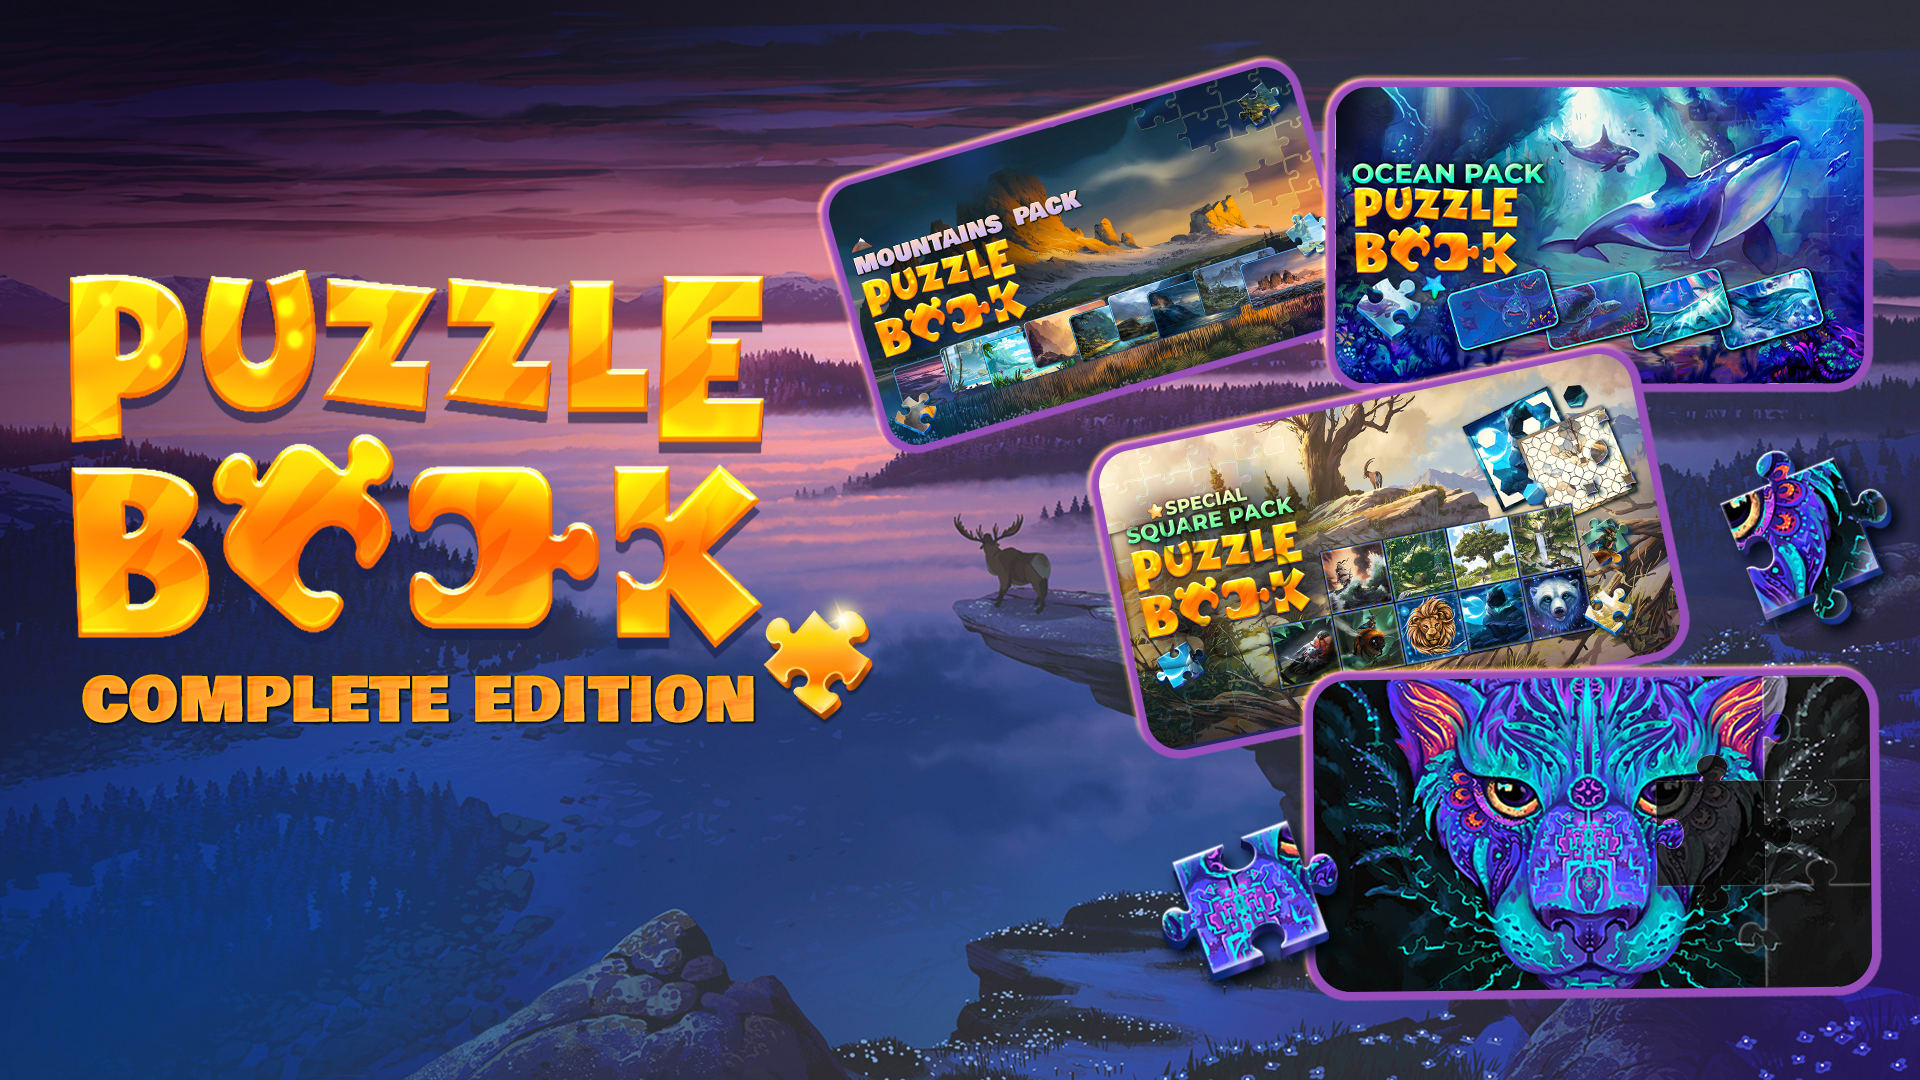 Puzzle Book Complete Edition